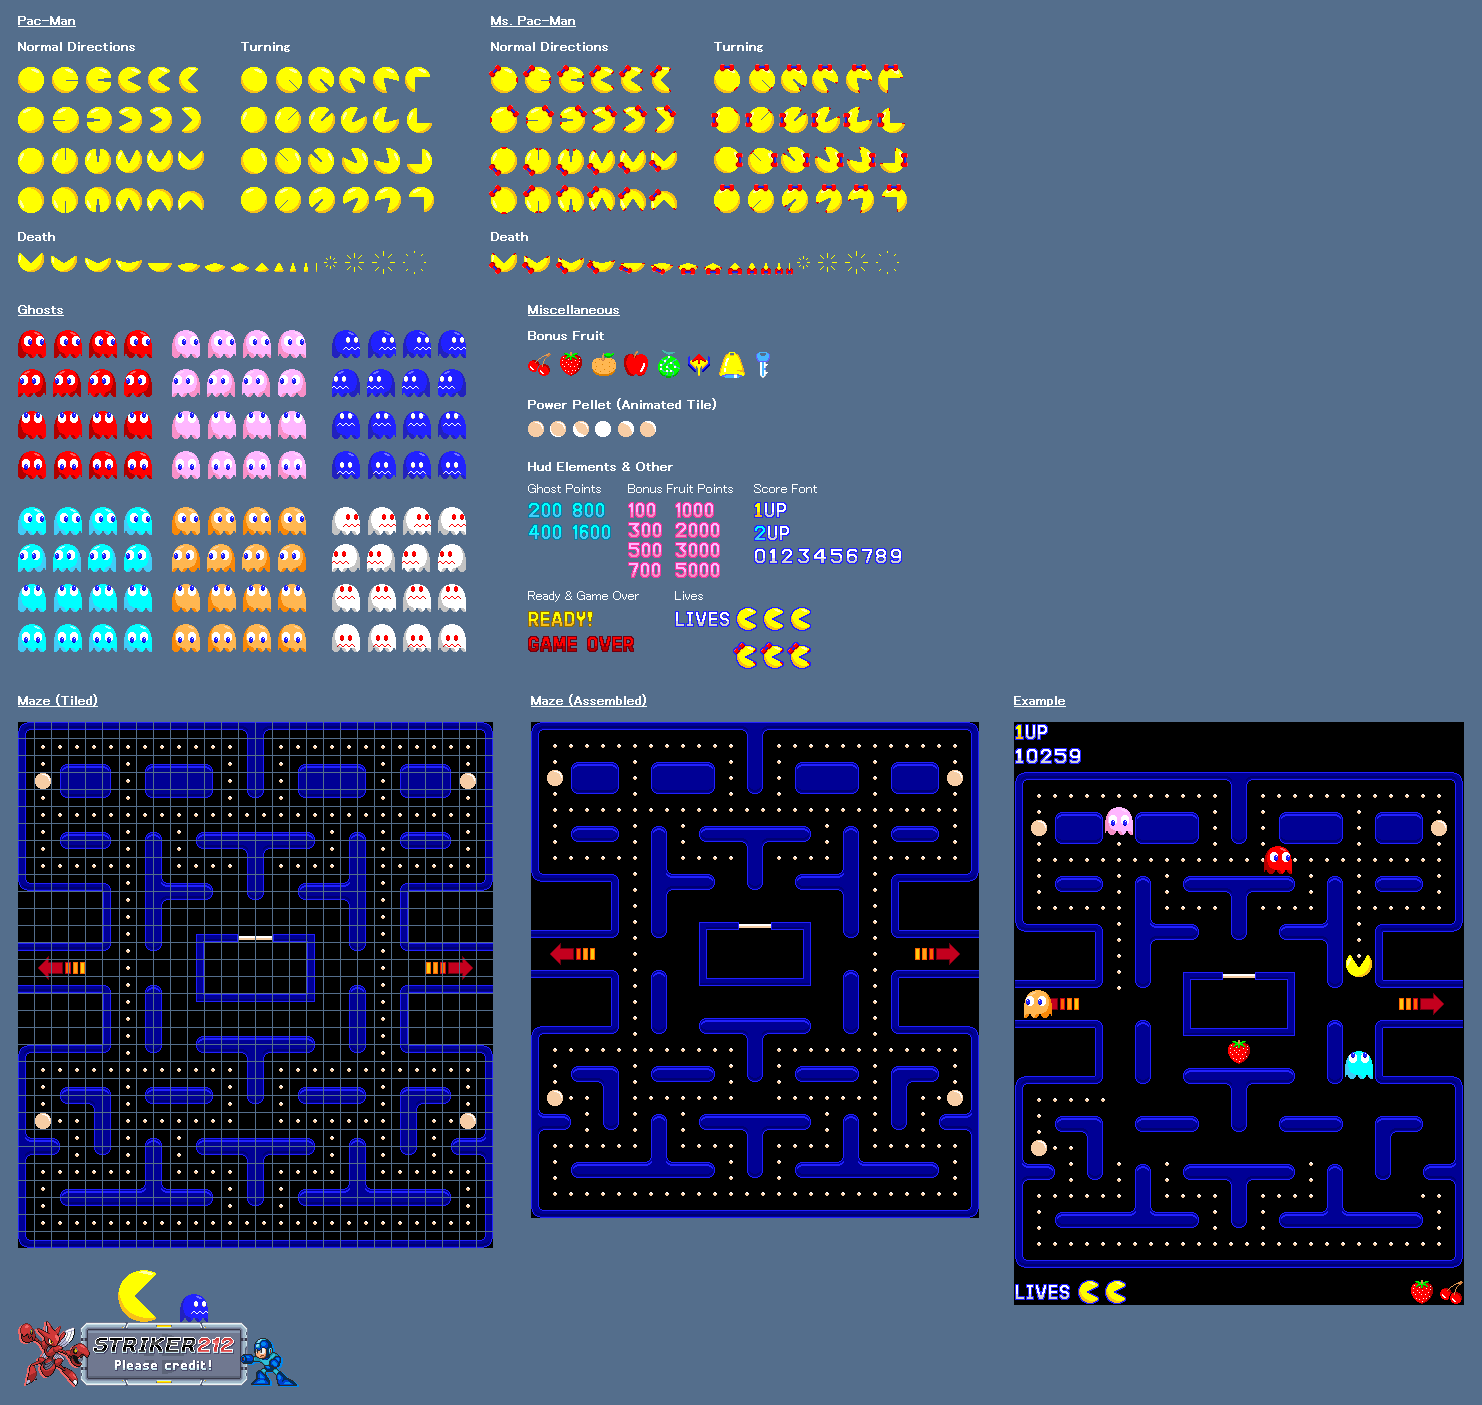 Pac-Man, Ms. Pac-Man, Ghosts, and Maze